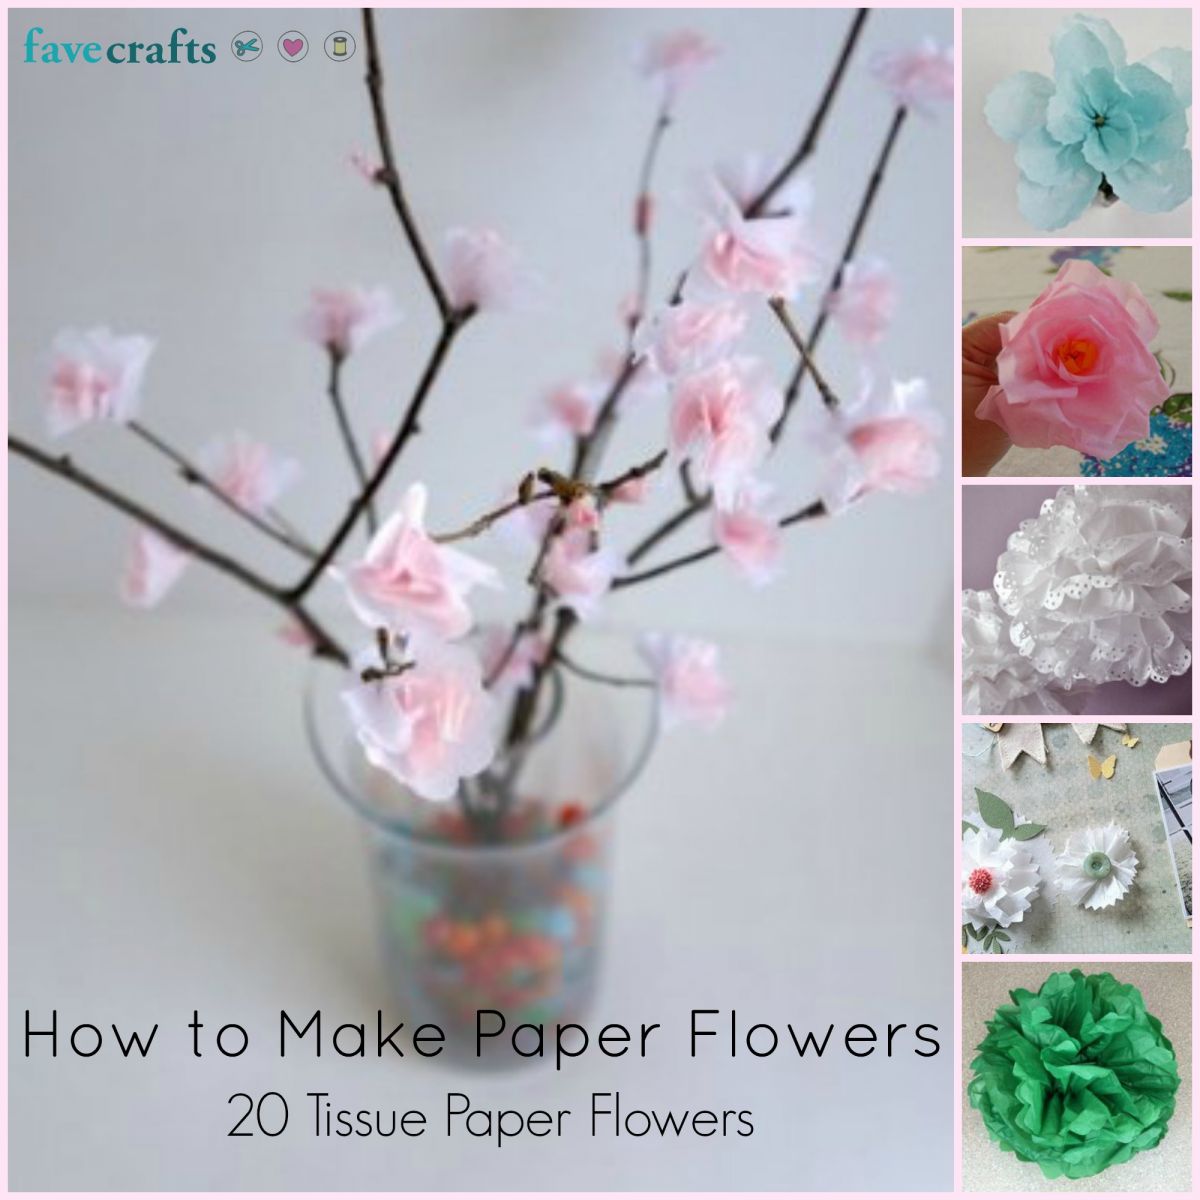 http://www.favequilts.com/master_images/Papercraft/how-to-make-paper-flowers.jpg